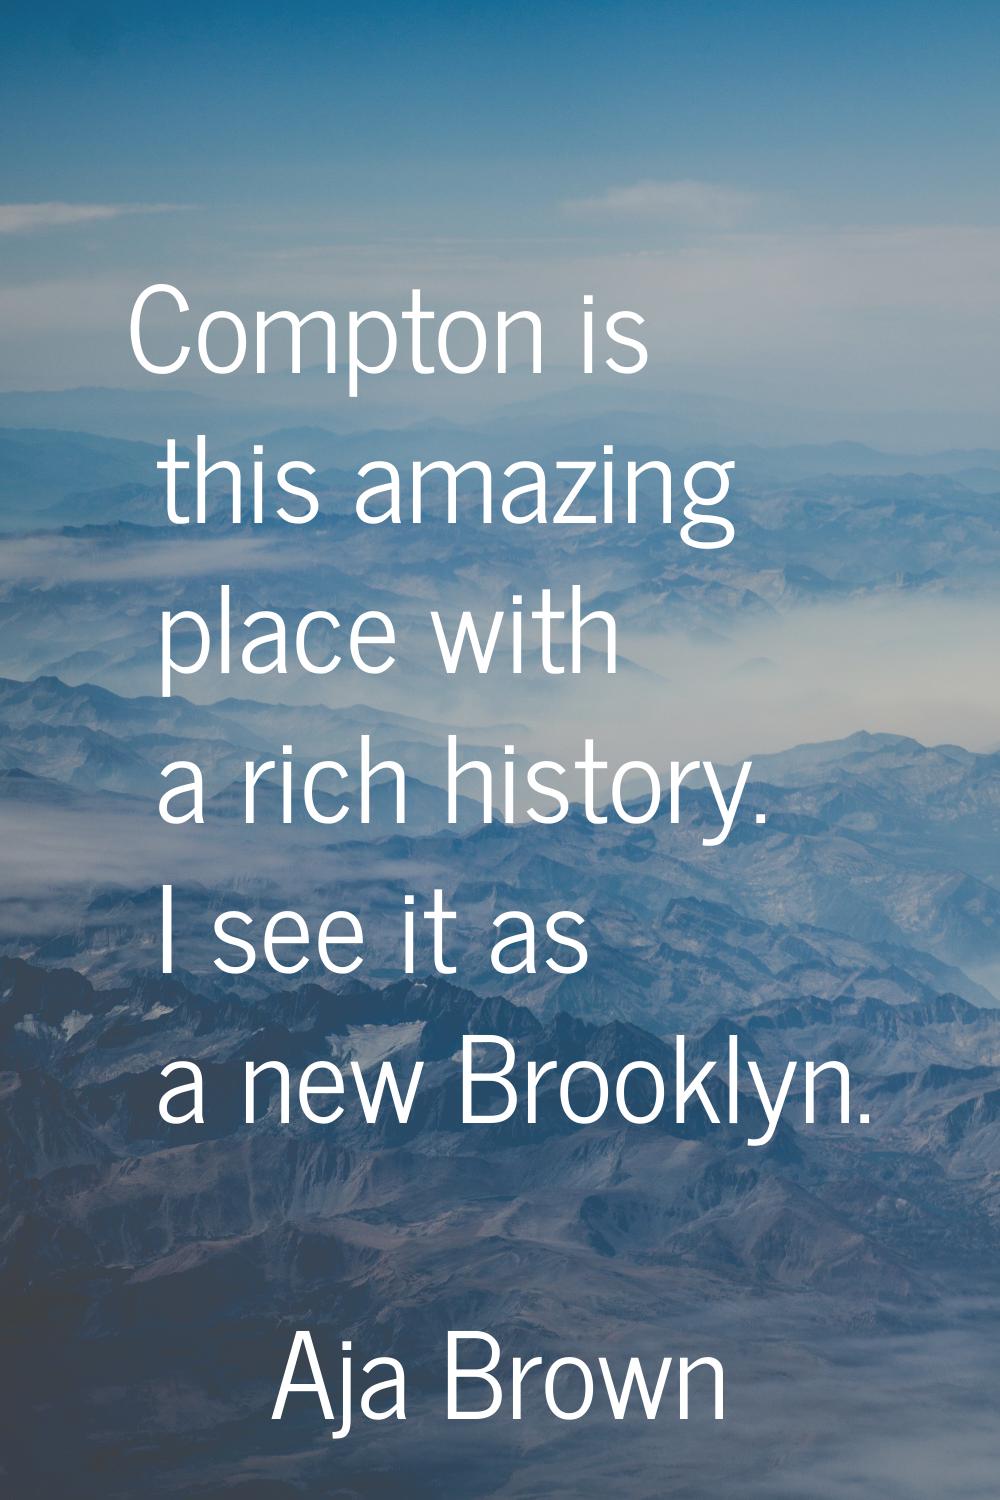 Compton is this amazing place with a rich history. I see it as a new Brooklyn.